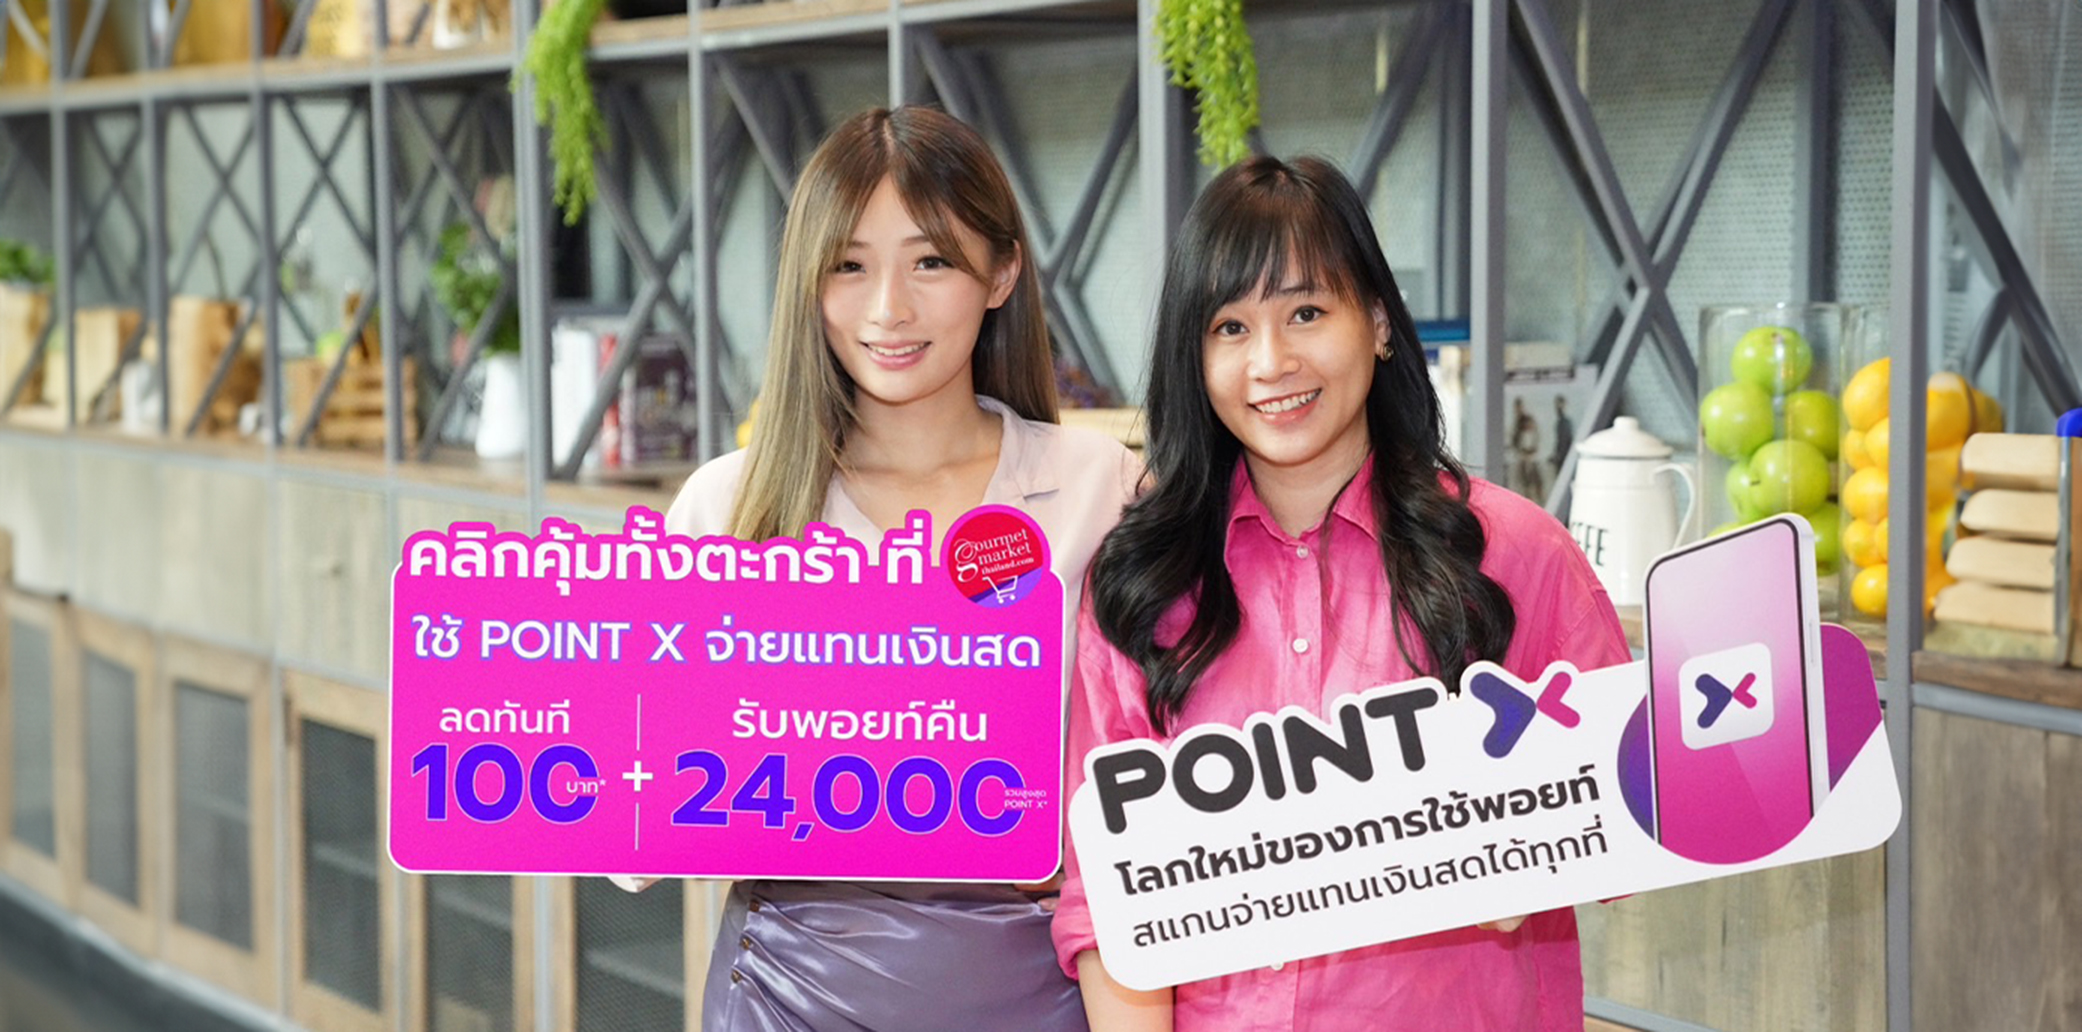 PointX introduces the thrilling “Click to Unlock Greater Deals on Your Gourmet Market Online Cart” campaign. Get a 100 Baht discount code and enjoy points back up to 24,000 PointX